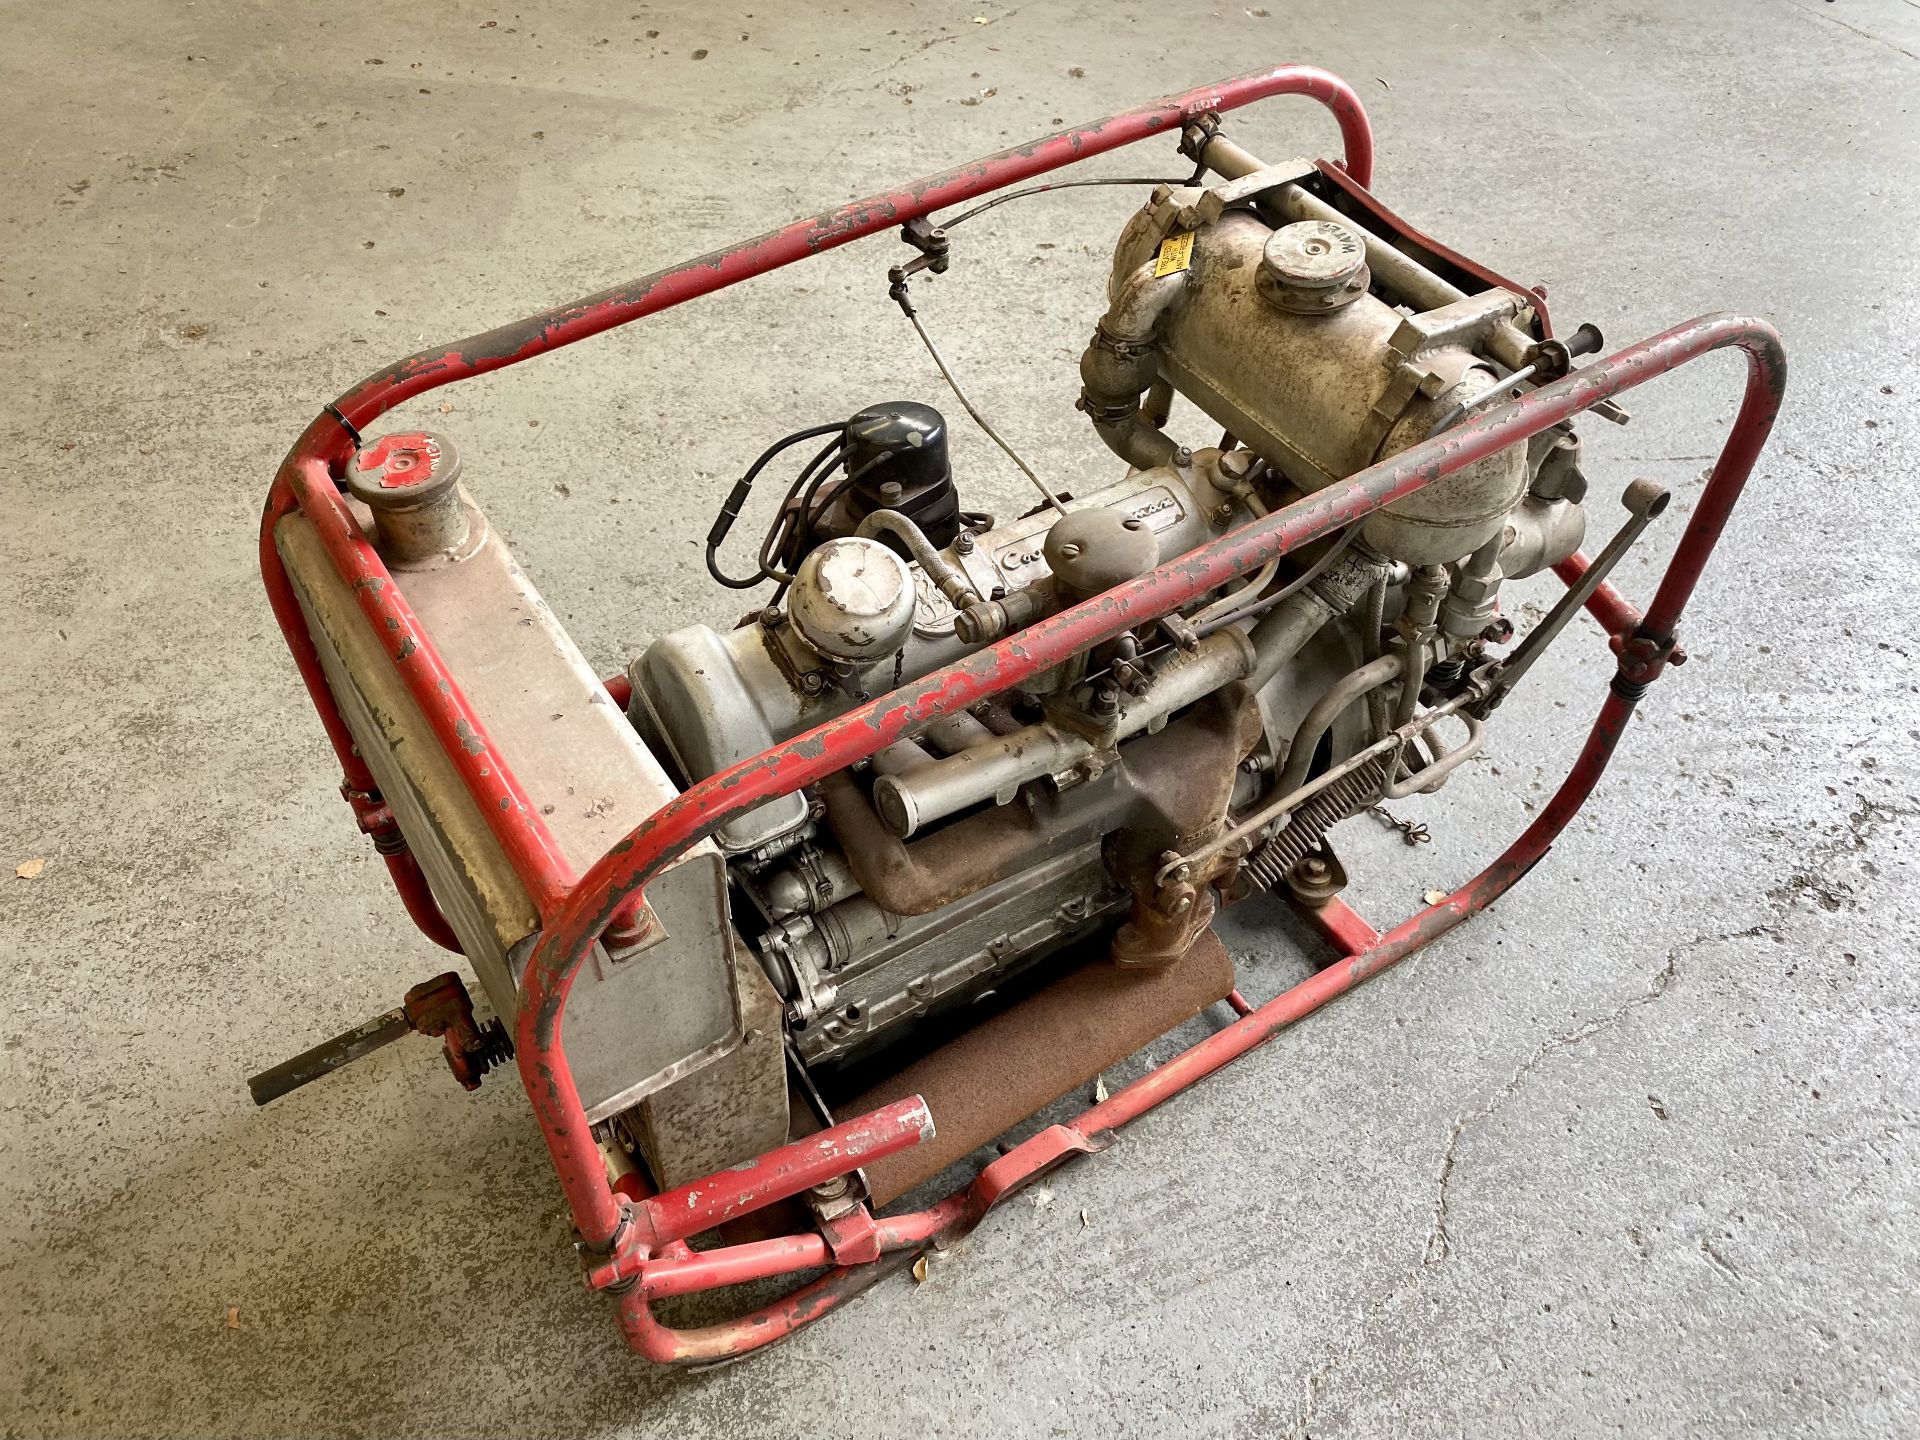 Coventry Climax Engine